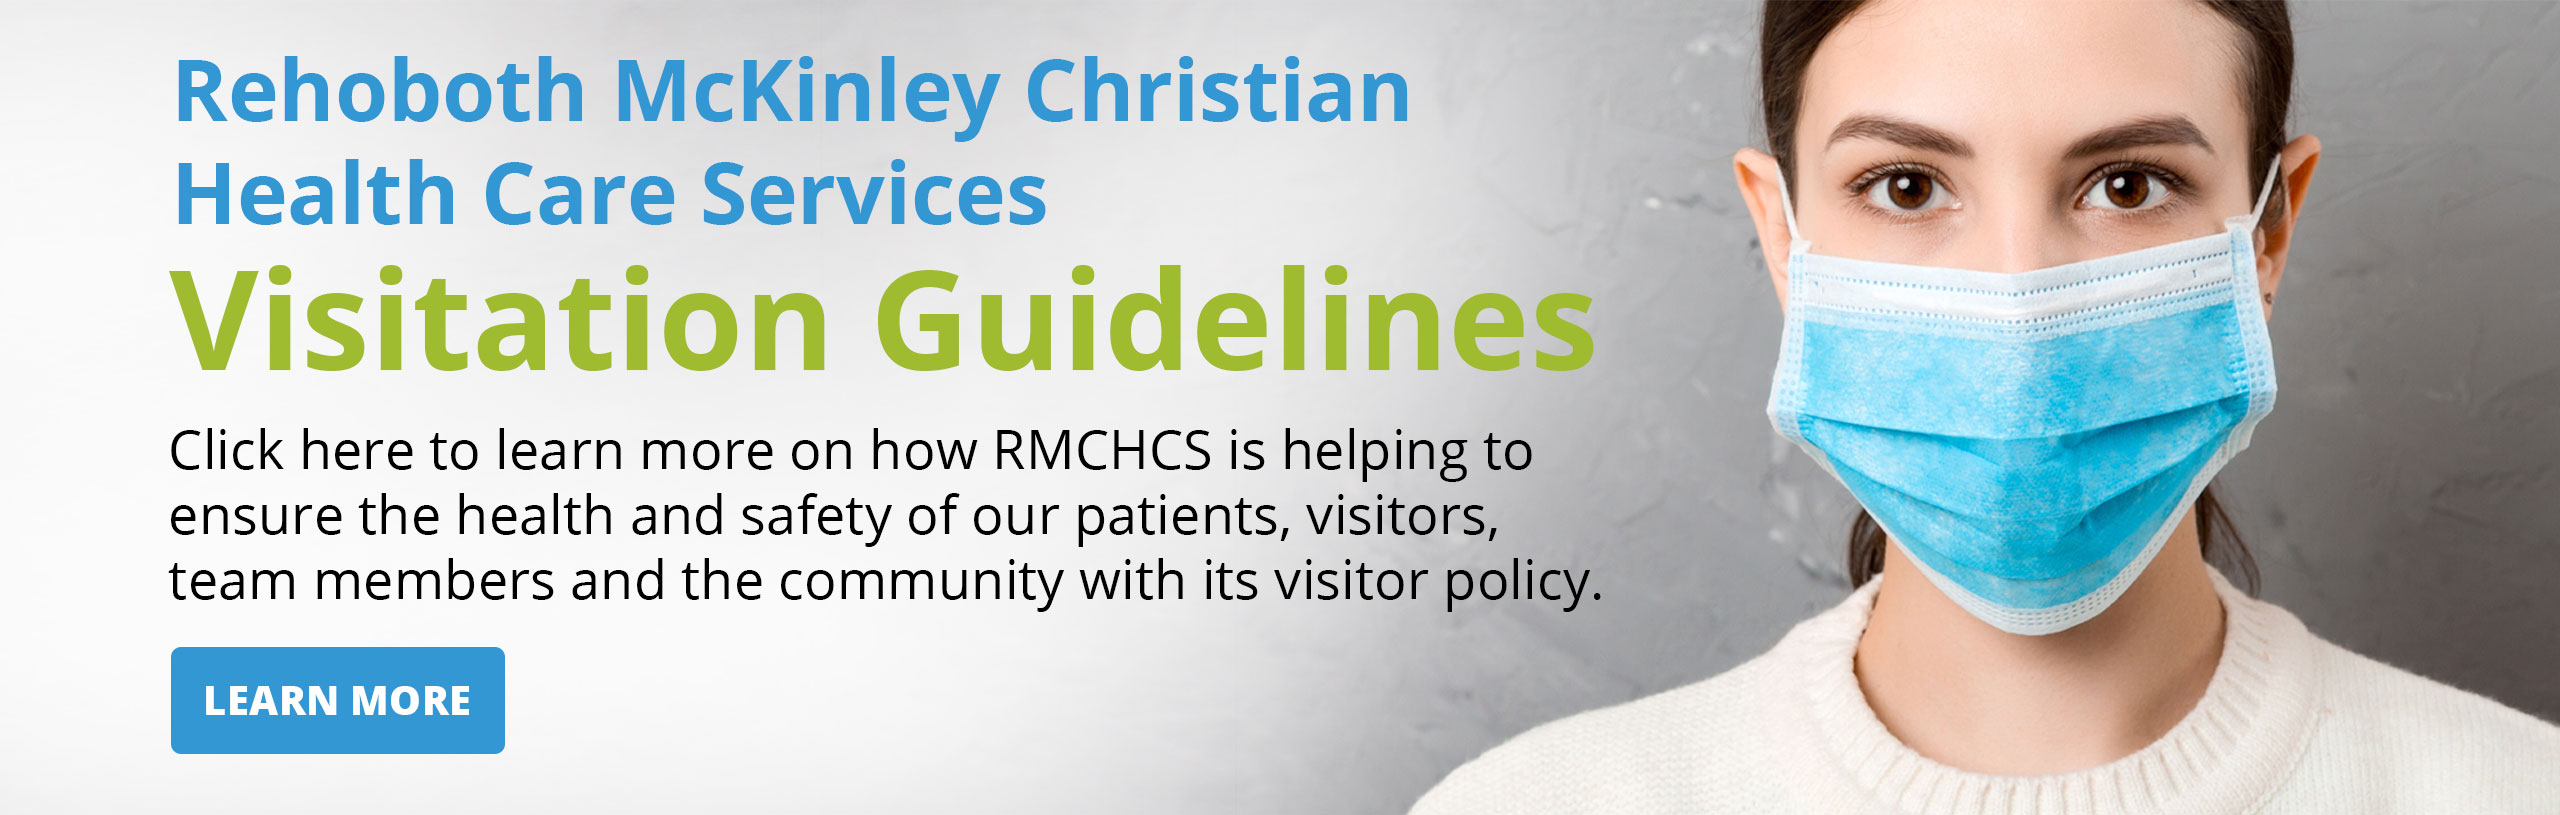 Banner picture of a female close up, wearing a mask. Banner says:

Rehoboth Mckinley Christian Health Care Services
Visitation Guidelines

Click here to learn more on how RMCHCS is helping to ensure the health and safety of our patients, visitors, team members, and the community with it's 

Rehoboth Mckinley Christian Health Care Services

Visitation Guidelines

Click here to learn more on how RMCHCS is helping to ensure the health and safety of our patients, visitors, team members and the community with it's visitor policy.

(((LEARN MORE)))